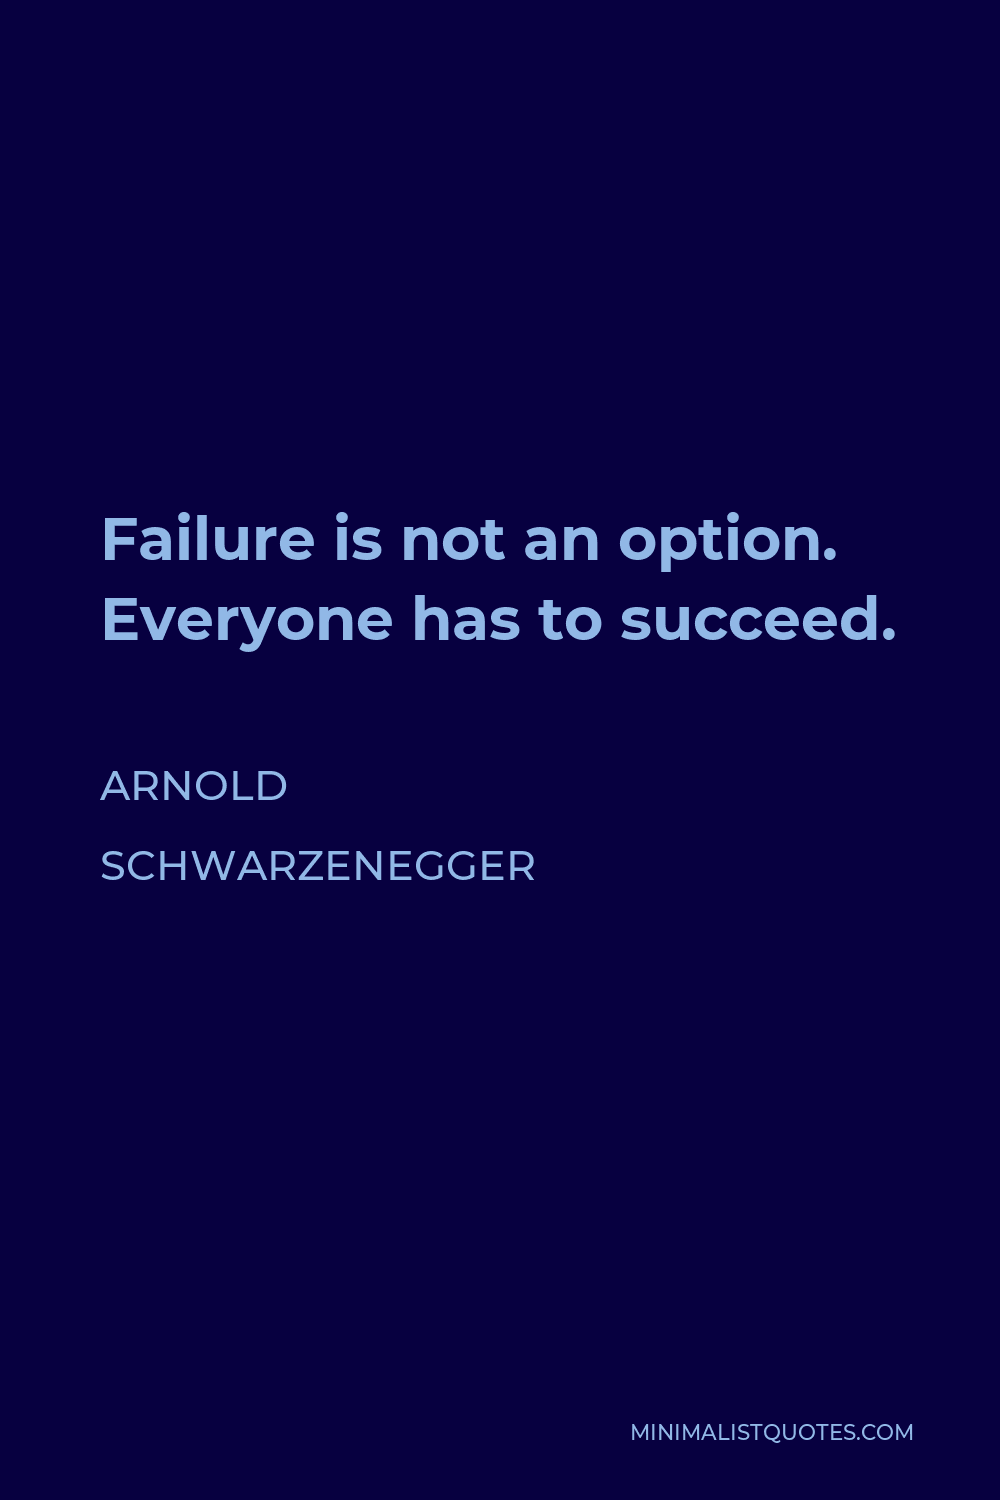 Arnold Schwarzenegger Quote - Failure is not an option. Everyone has to succeed.